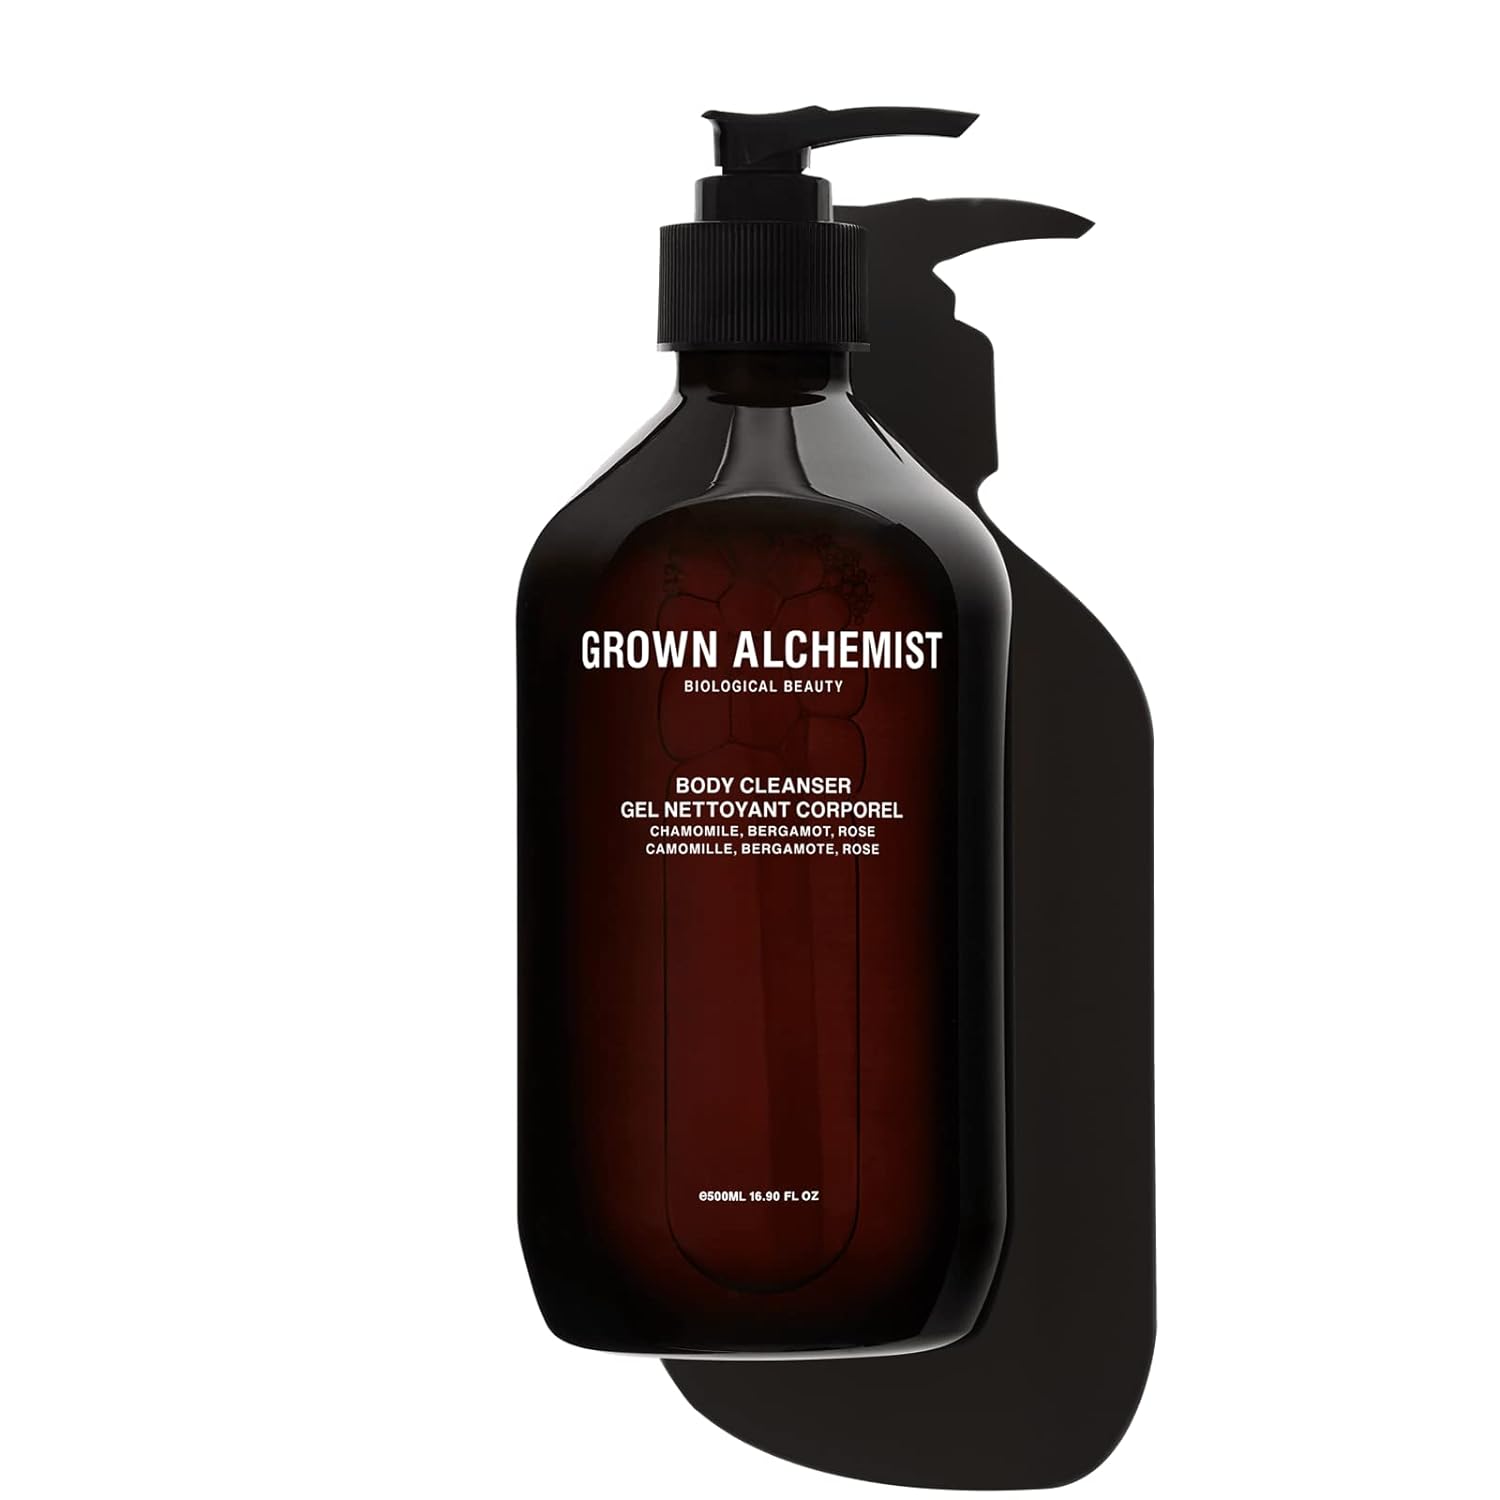 Grown Alchemist Chamomile, Bergamot & Rose Body Cleanser. Gentle Body Wash that Hydrates and Cleanses Skin (500 ml)